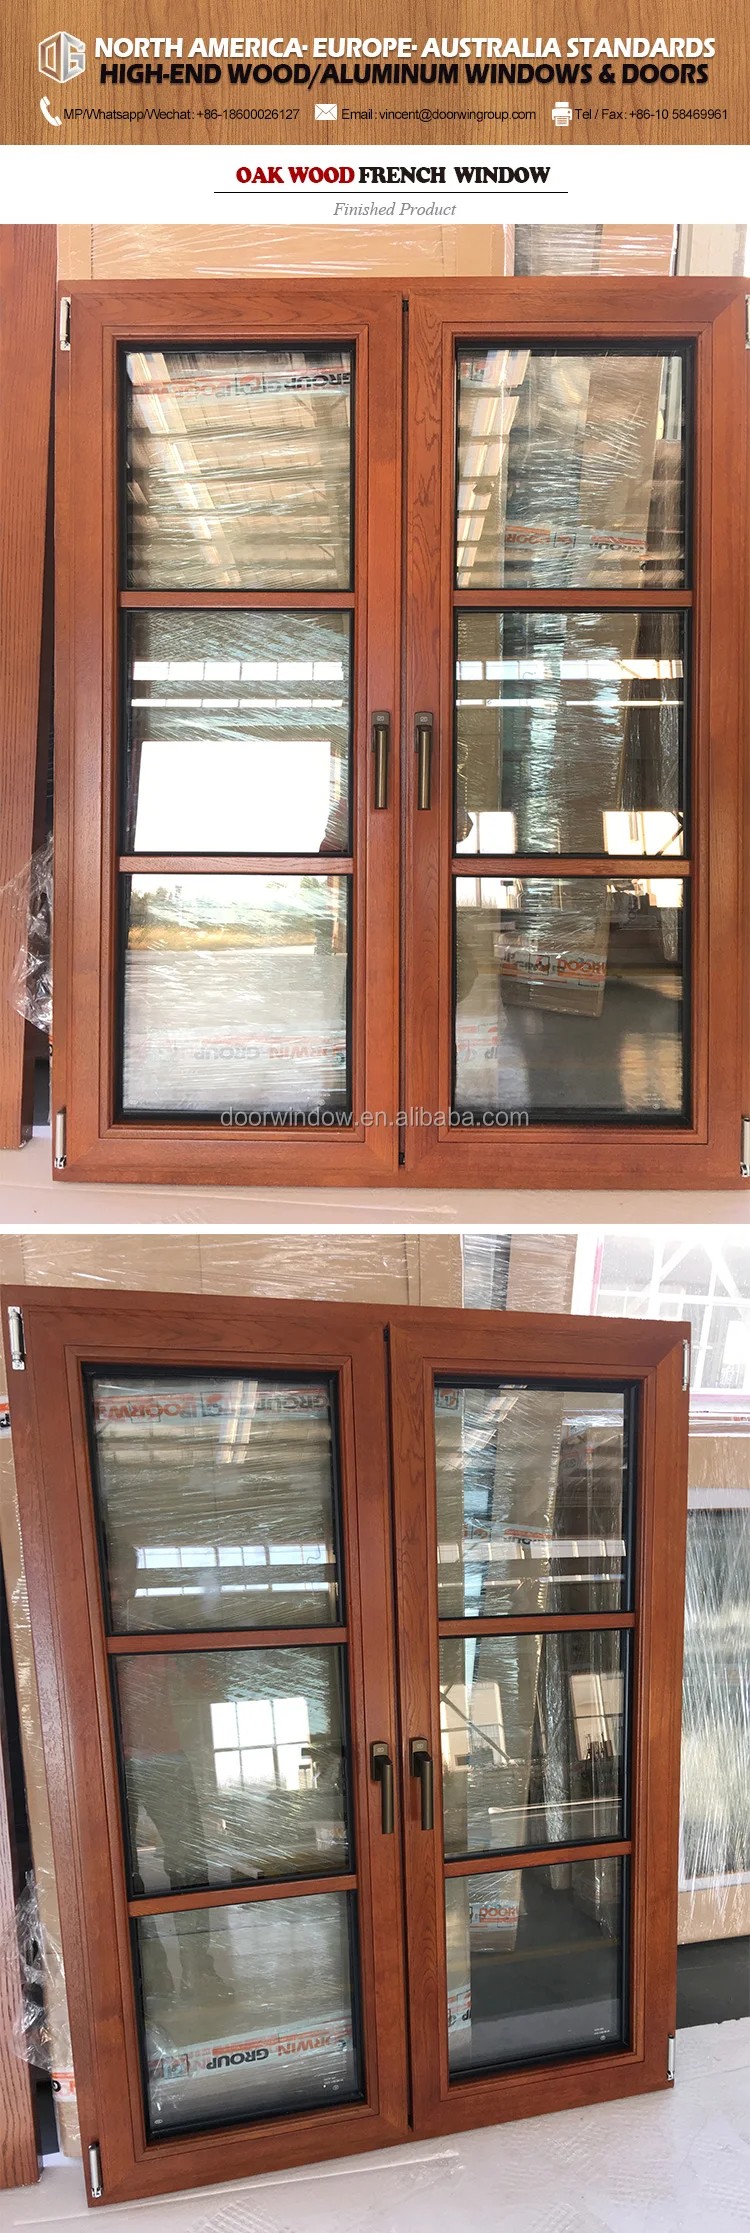 High quality condensation inside double pane windows